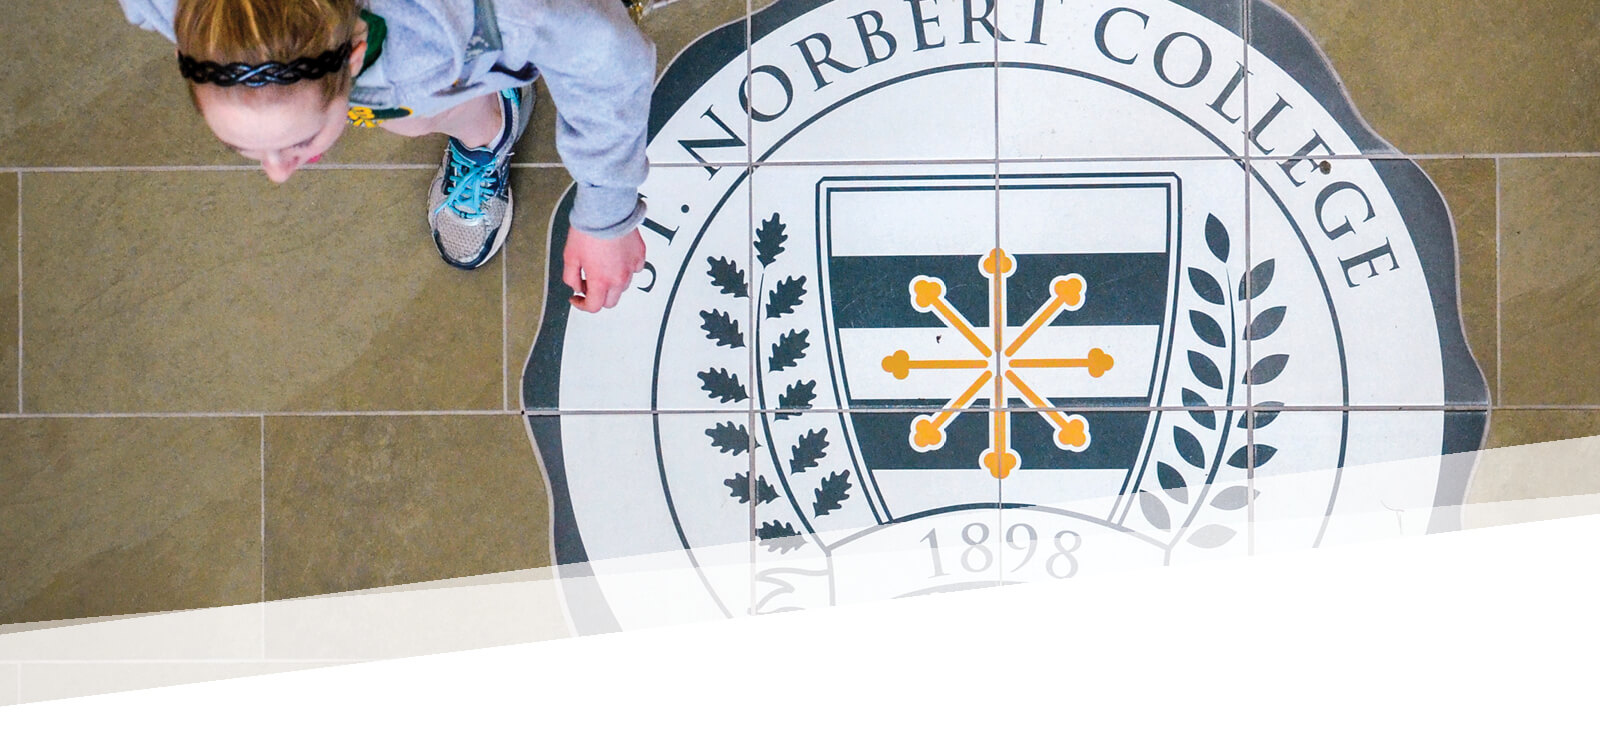 Overhead shot of the president's seal on the floor as a student walks over it